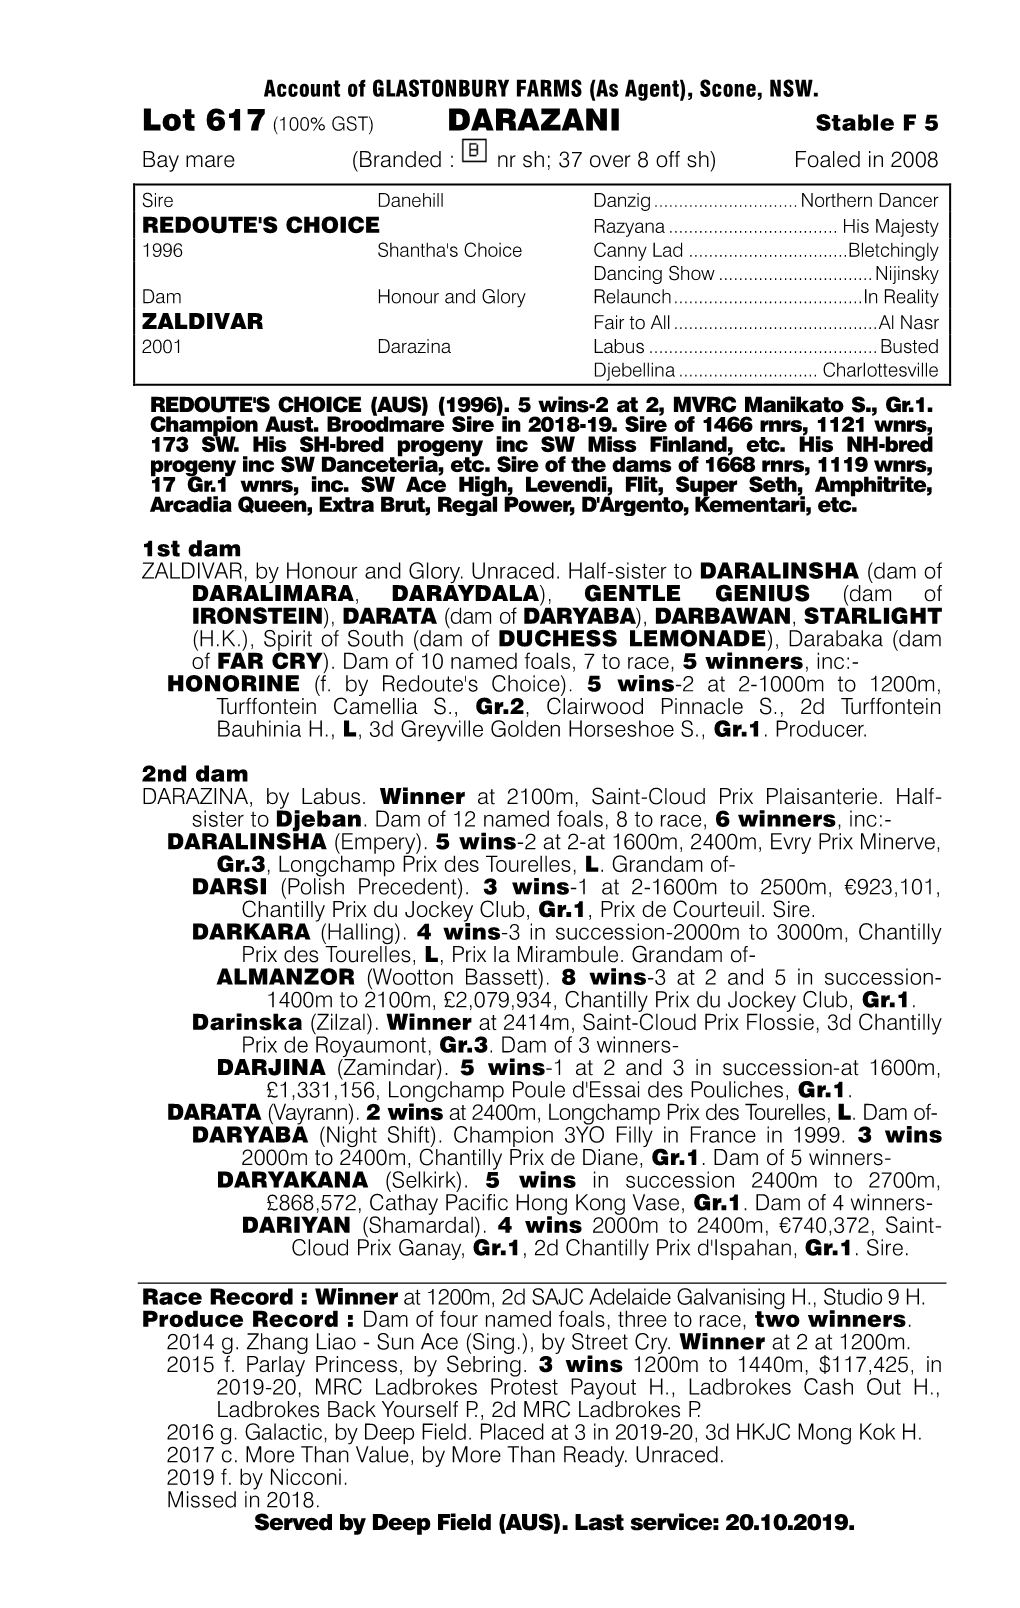 DARAZANI Stable F 5 Bay Mare (Branded : Nr Sh; 37 Over 8 Off Sh) Foaled in 2008